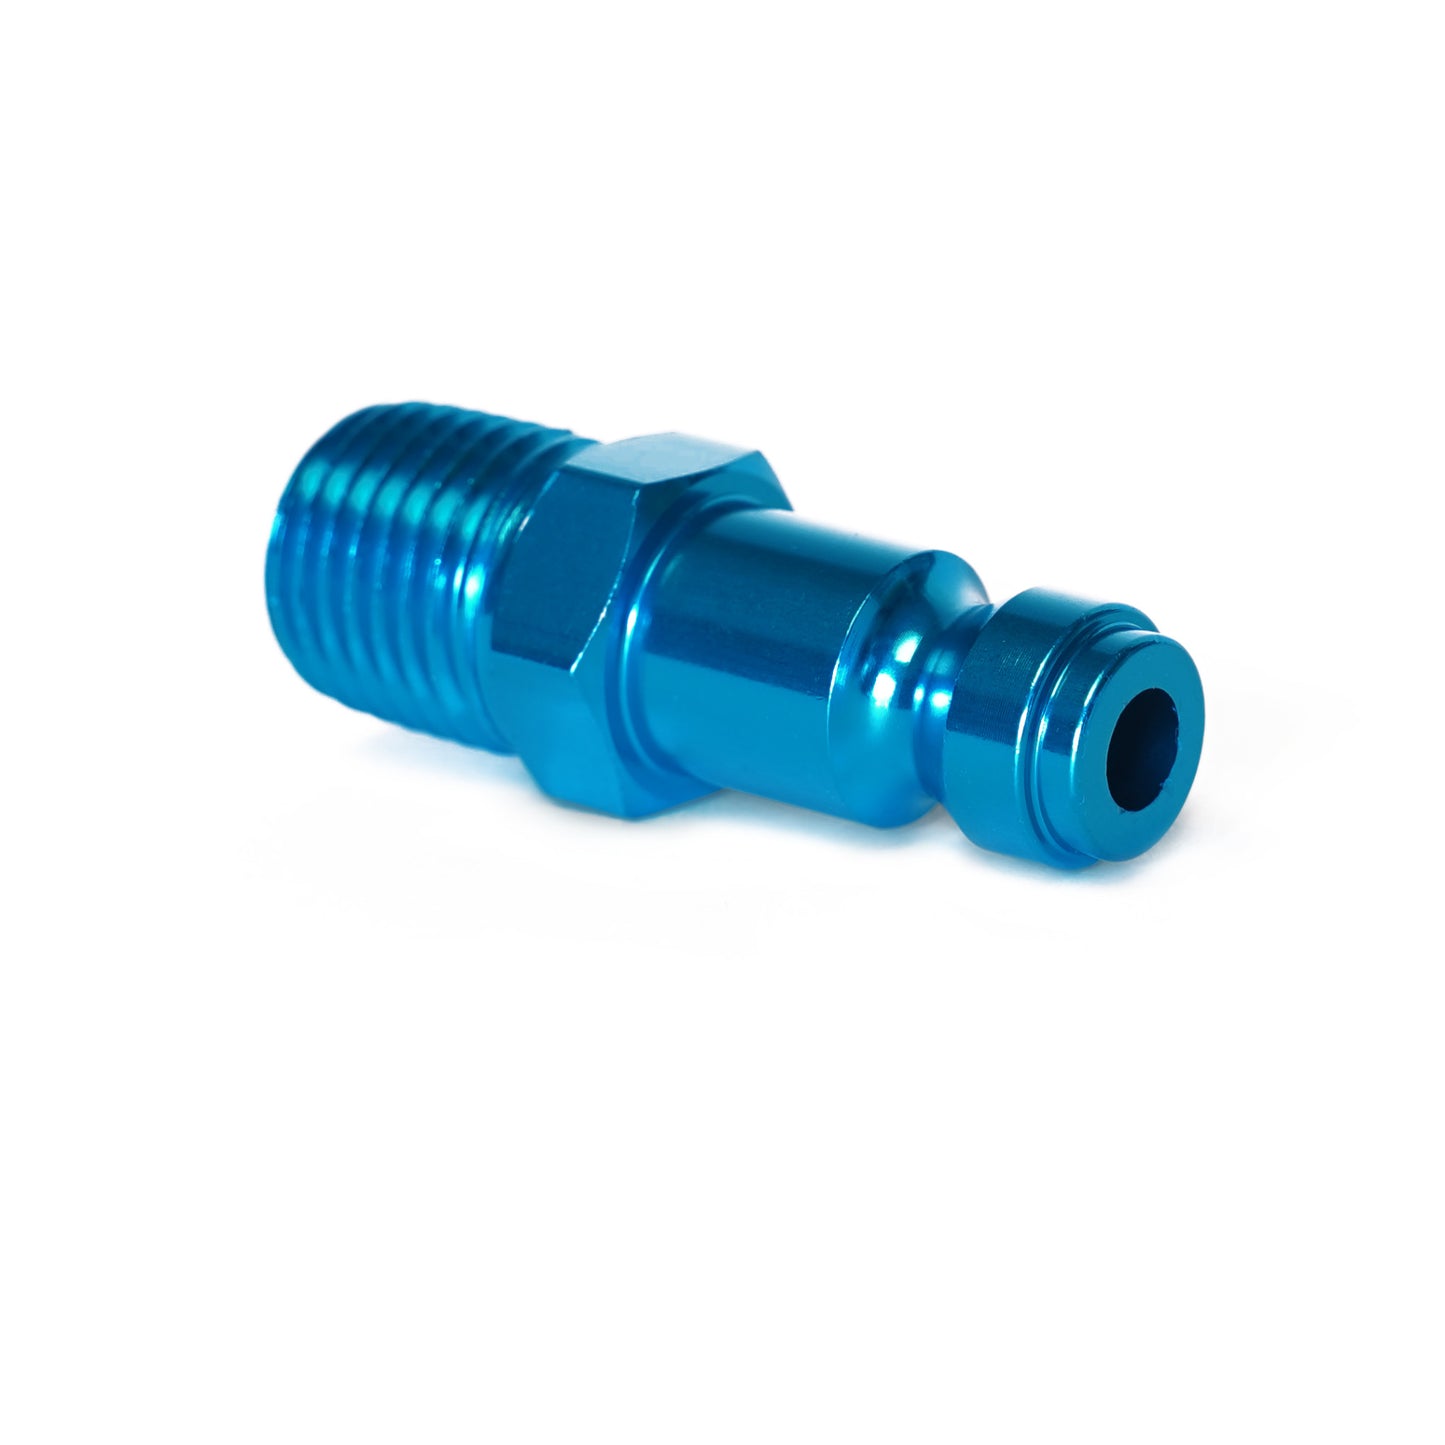 1/4-inch Plated Steel Automotive Quick Disconnect Plug with 1/4-inch Male NPT Threads